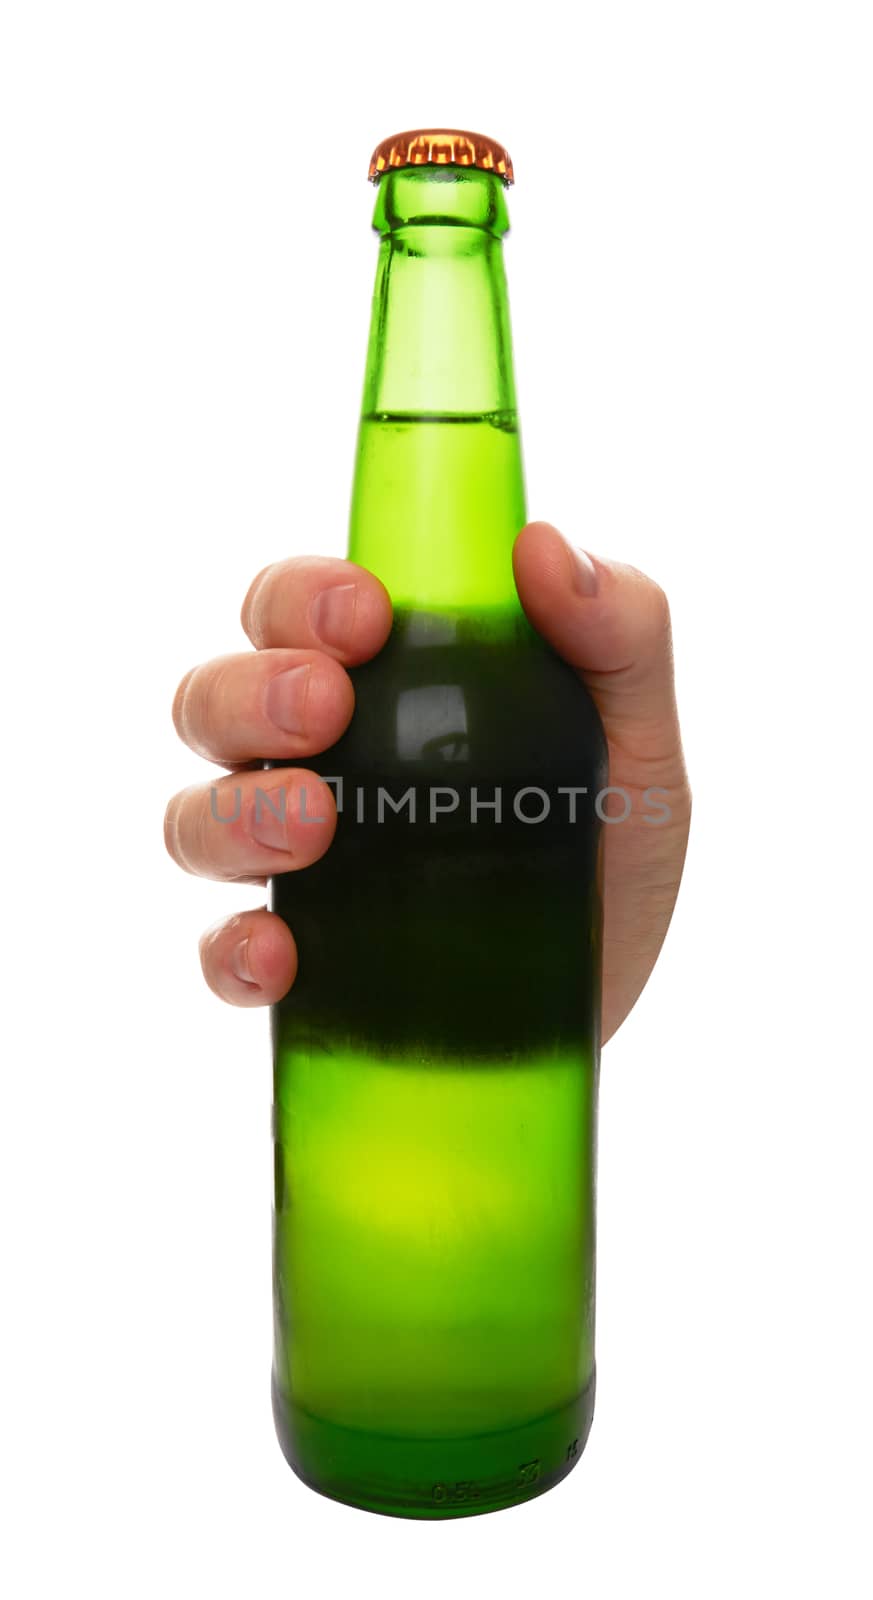 green beer bottle without label in hand isolated on white background